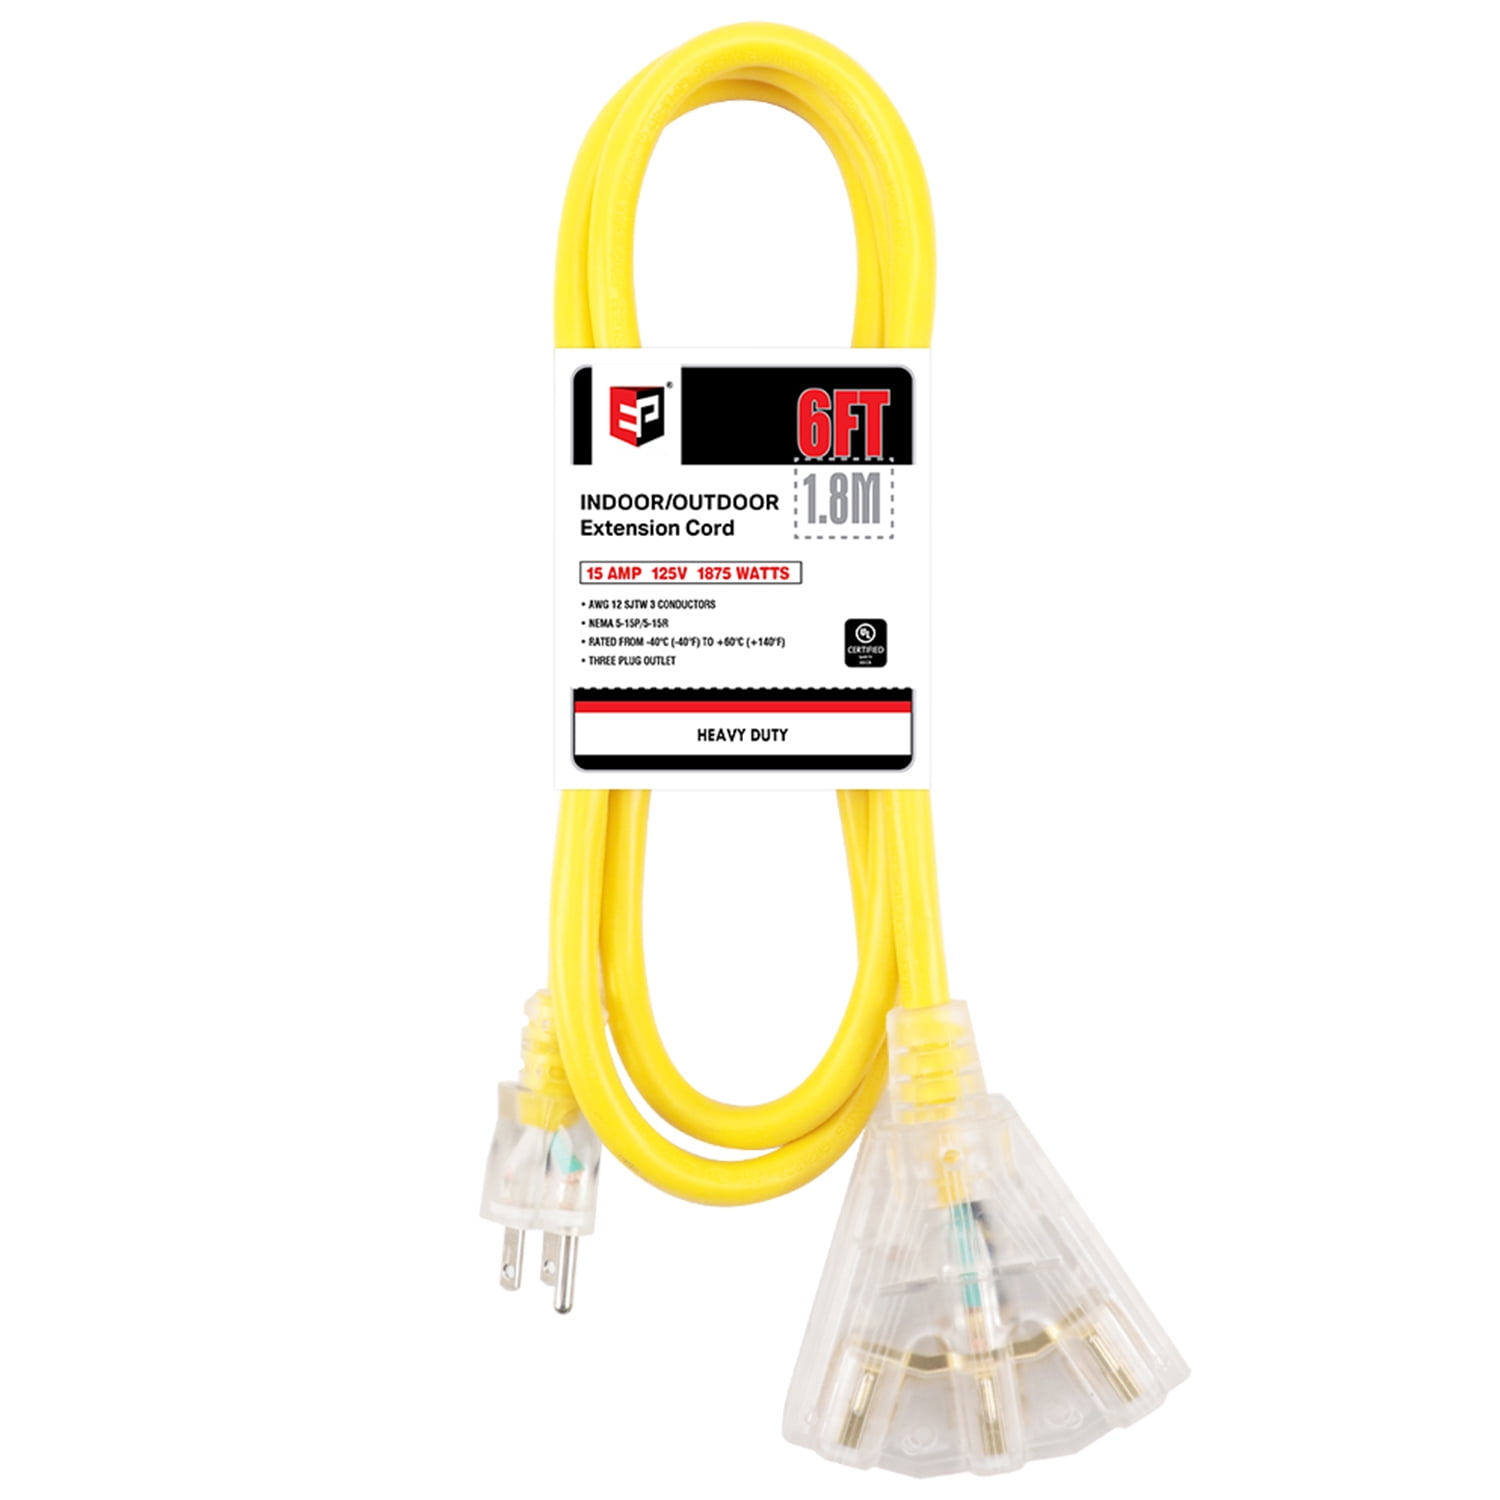 EP 6 Ft Lighted Outdoor Extension Cord with 3 Electrical Power Outlets - 12/ 3 SJTW Heavy Duty Yellow Extension Cable with 3 Prong Grounded Plug for  Safety, UL Listed 